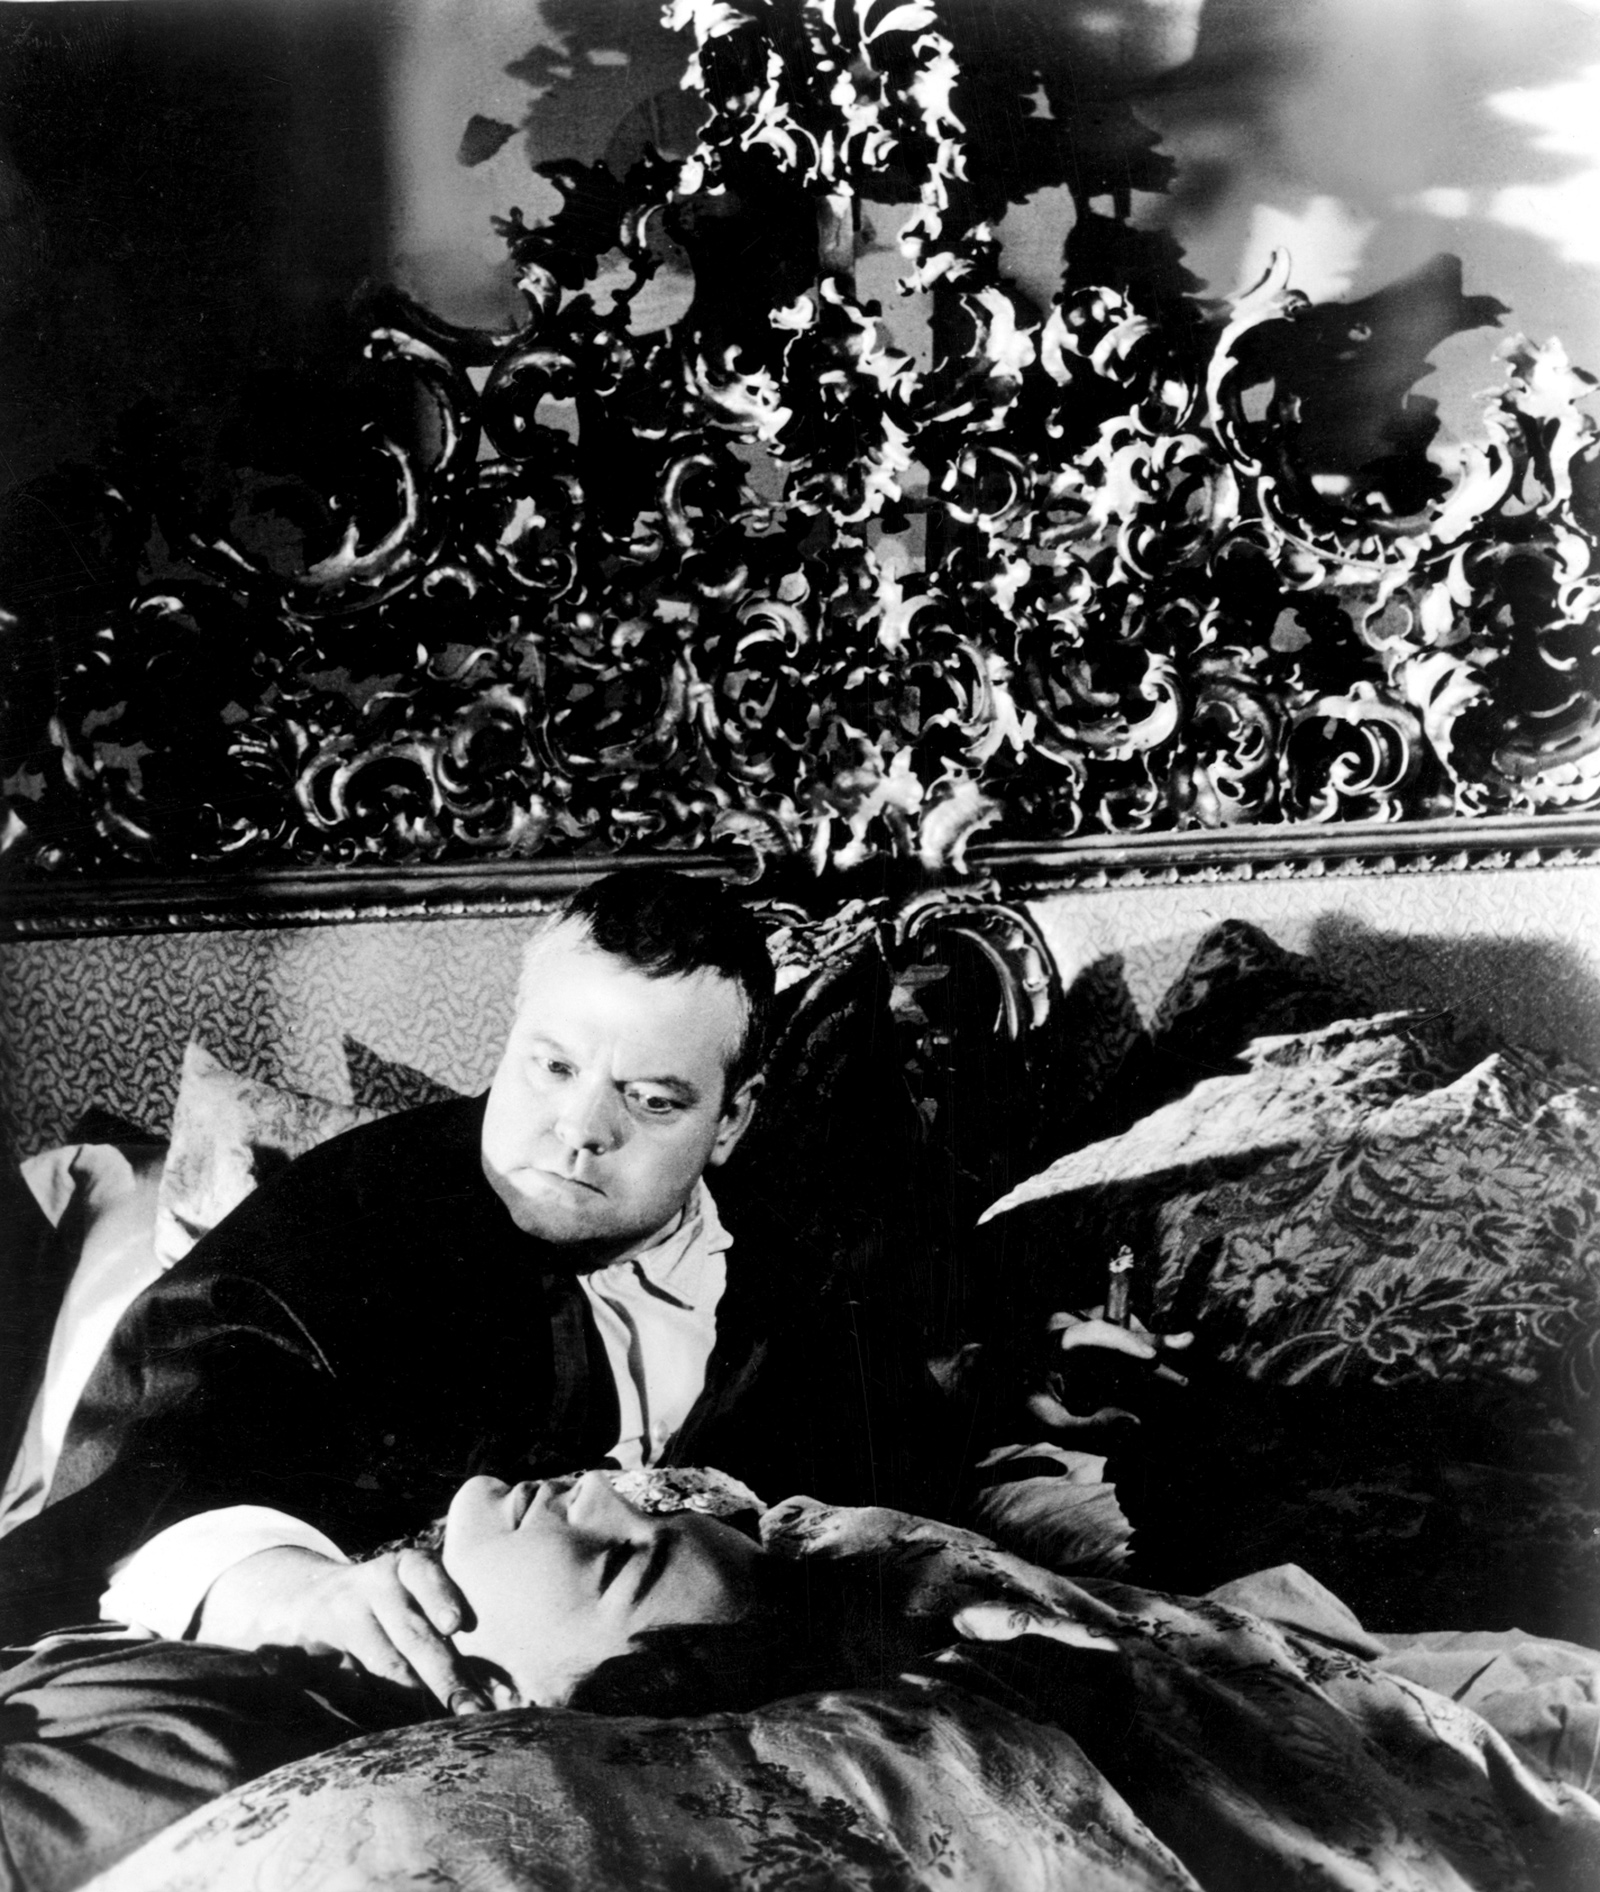 Orson Welles and Romy Schneider in The Trial, 1962